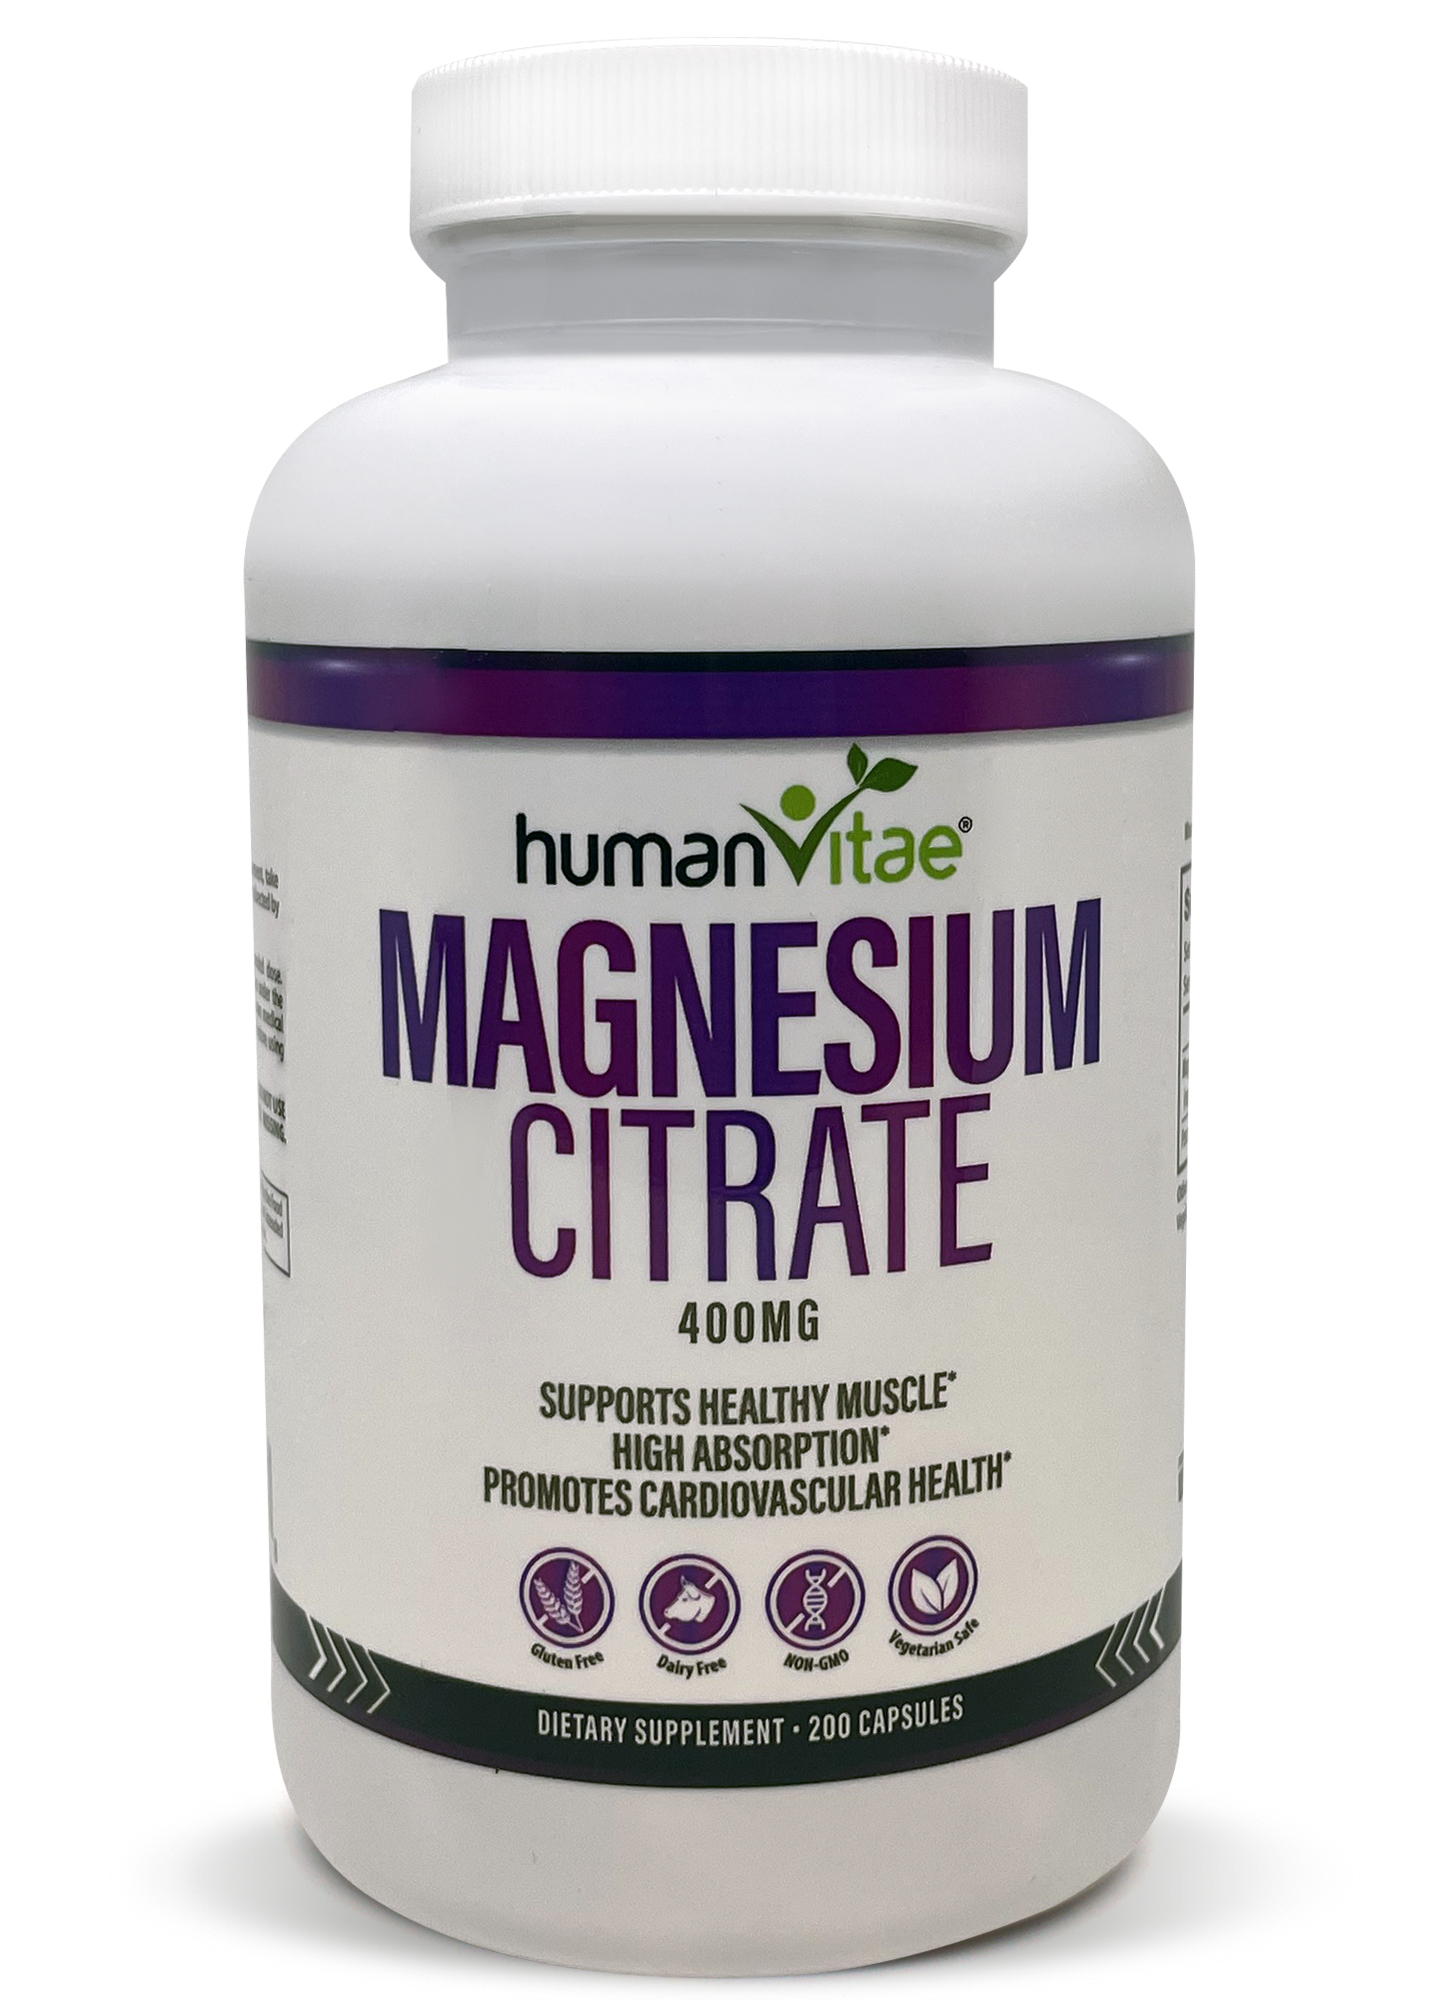 Magnesium Citrate 400 mg by human vitae